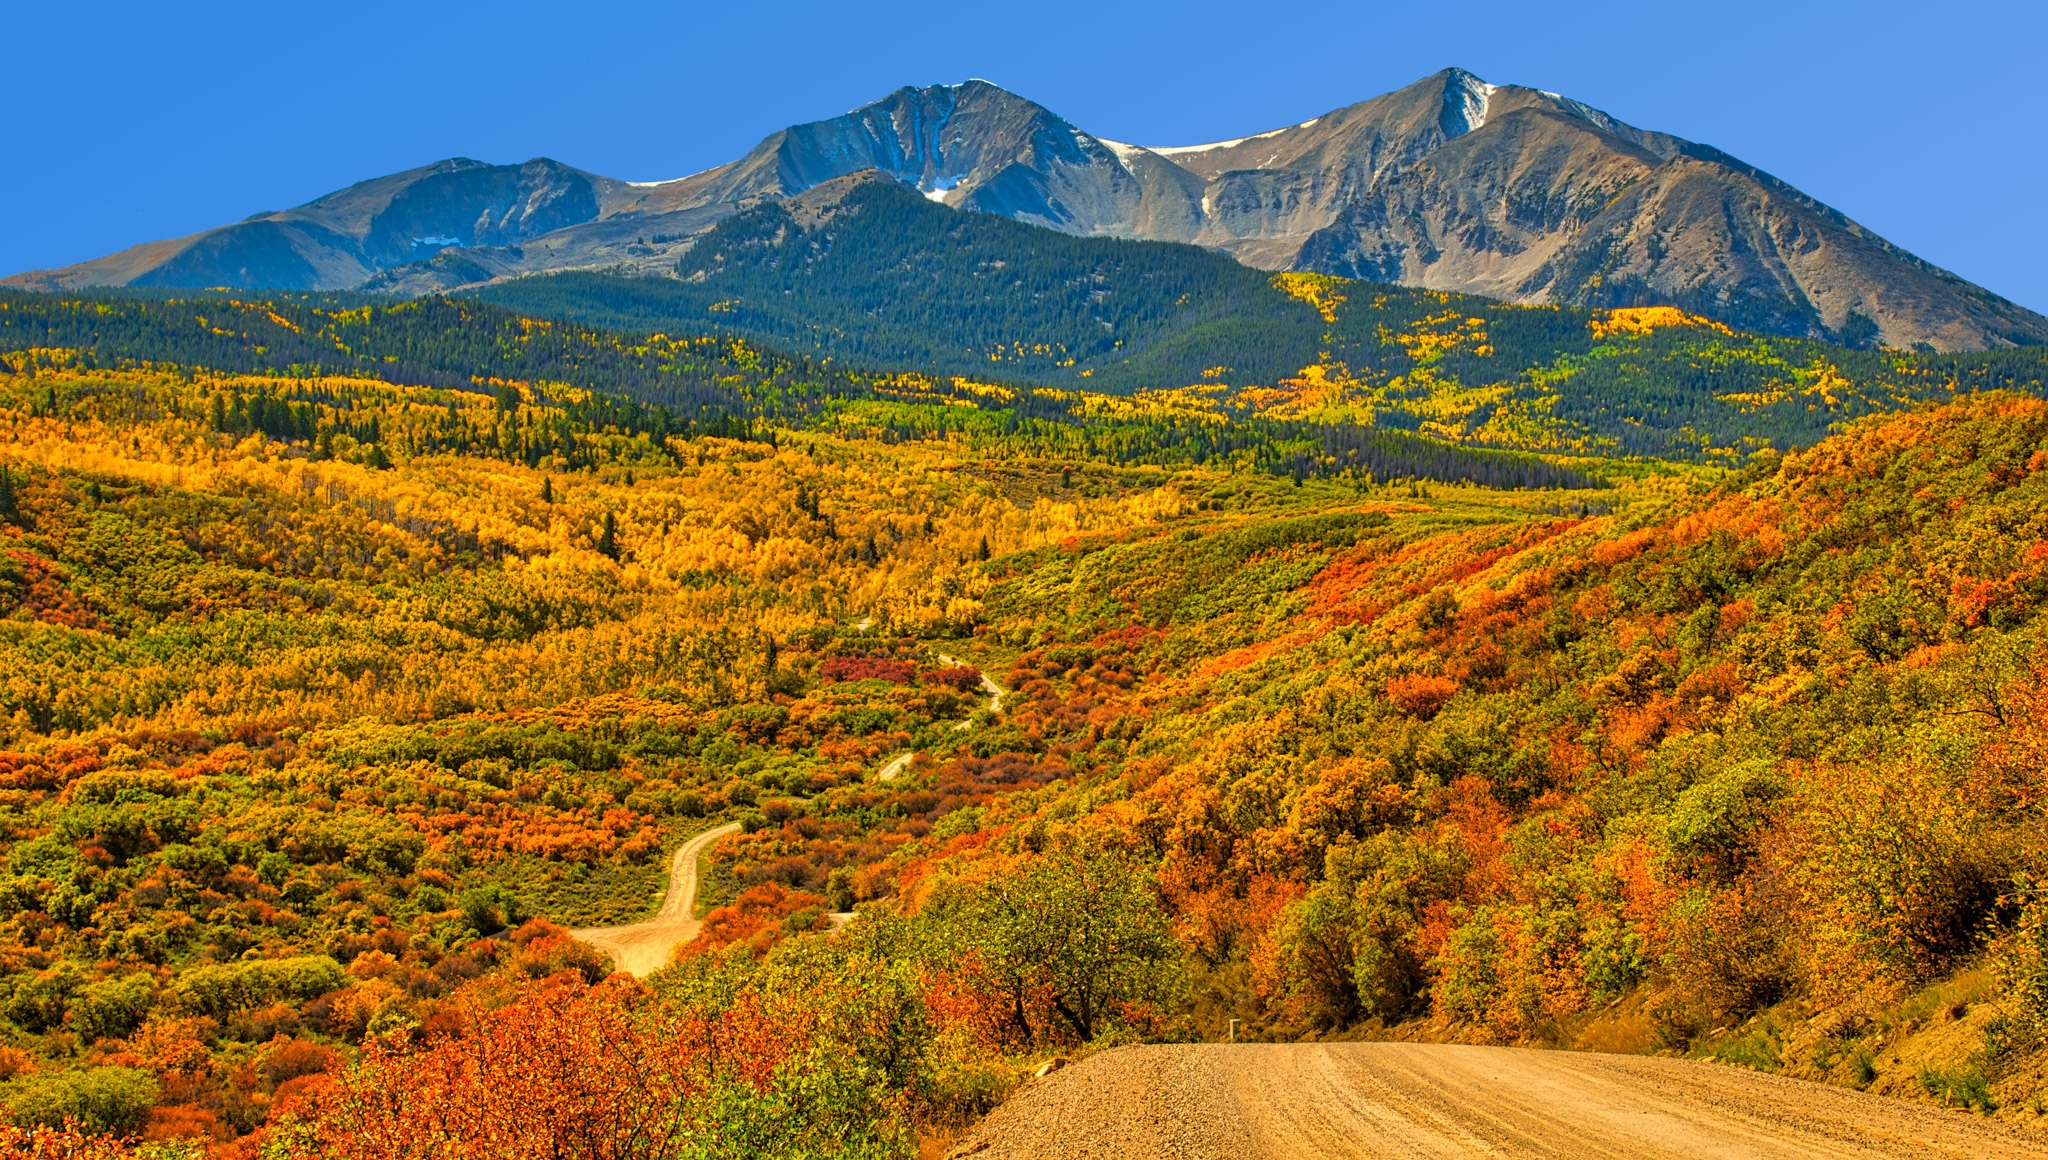 A rolling expanse of aspens, oaks, and pines create a panorama along West Sopris Creek Road near Aspen, Colorado.